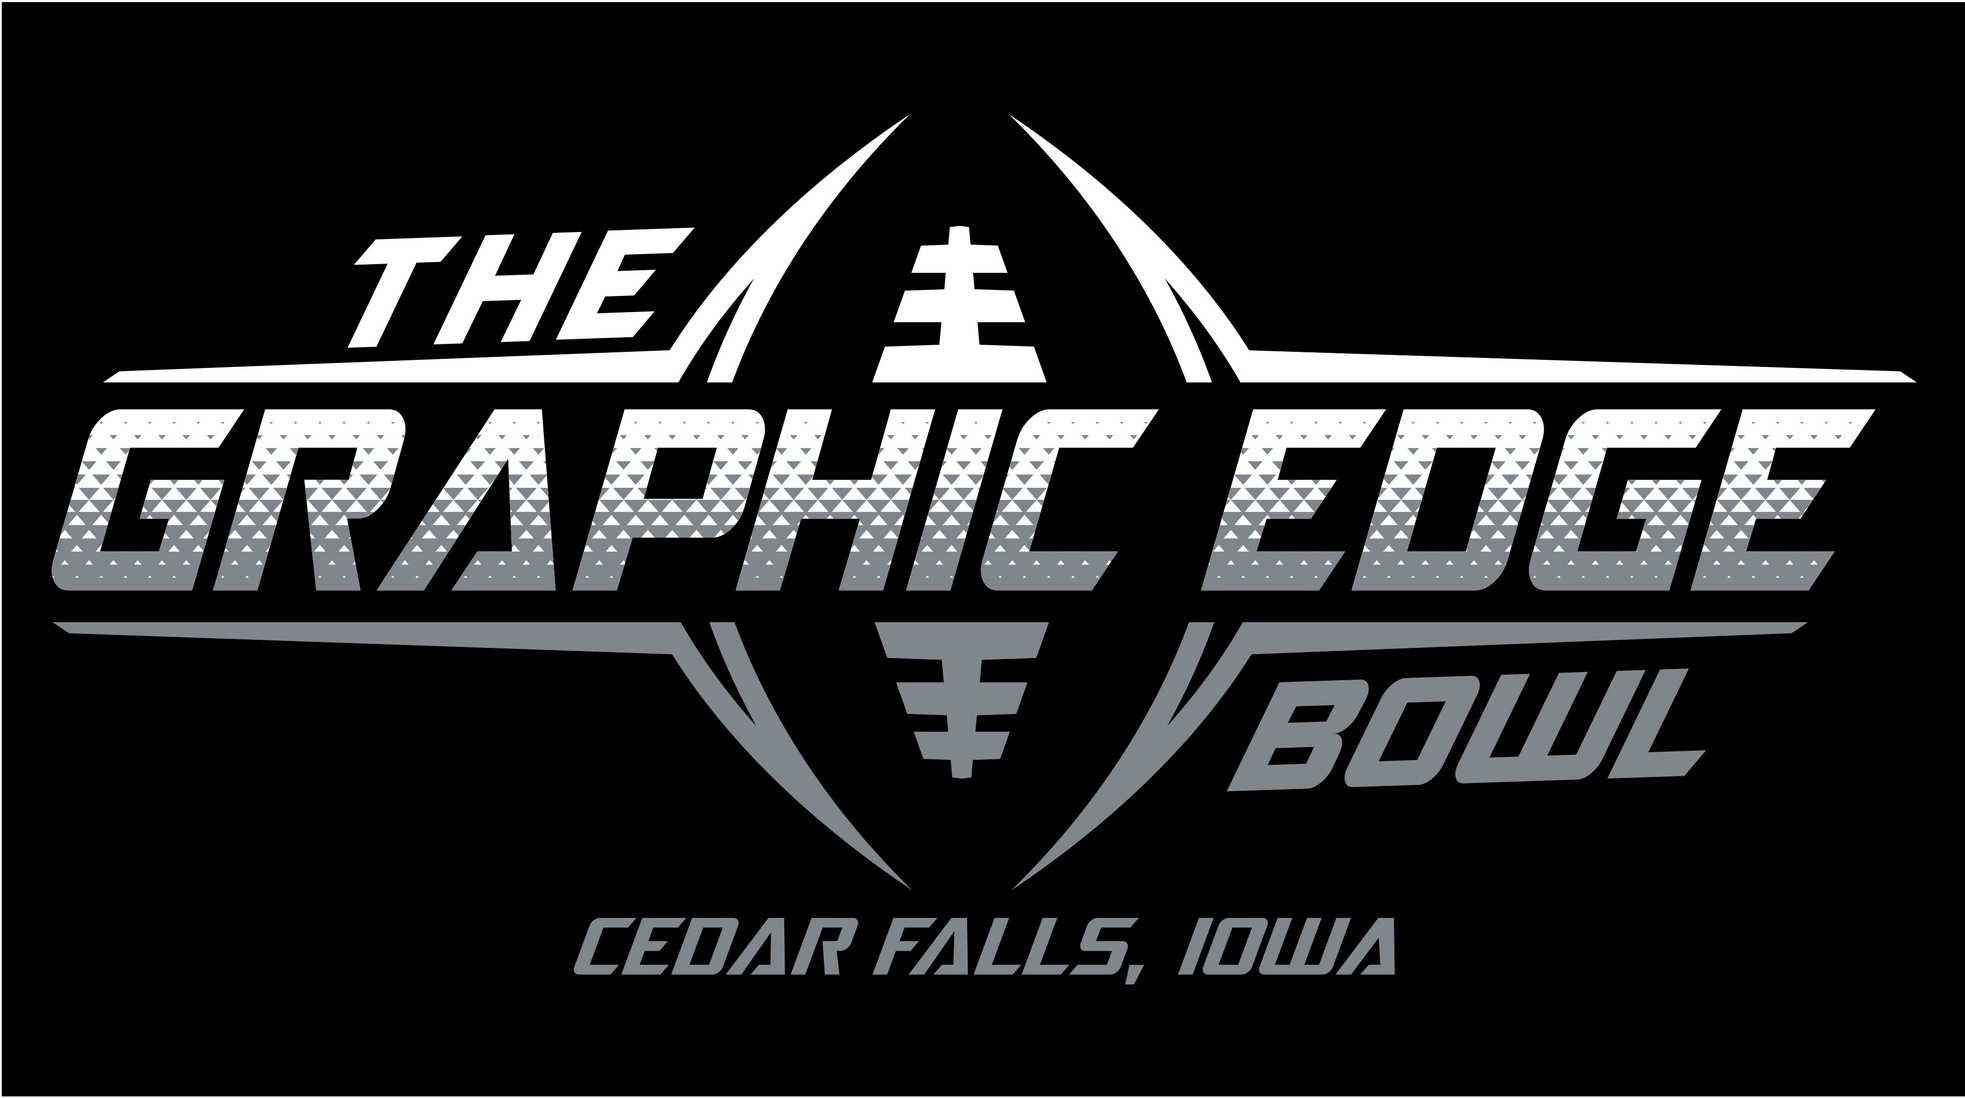 Graphic Edge Bowl tickets now on sale